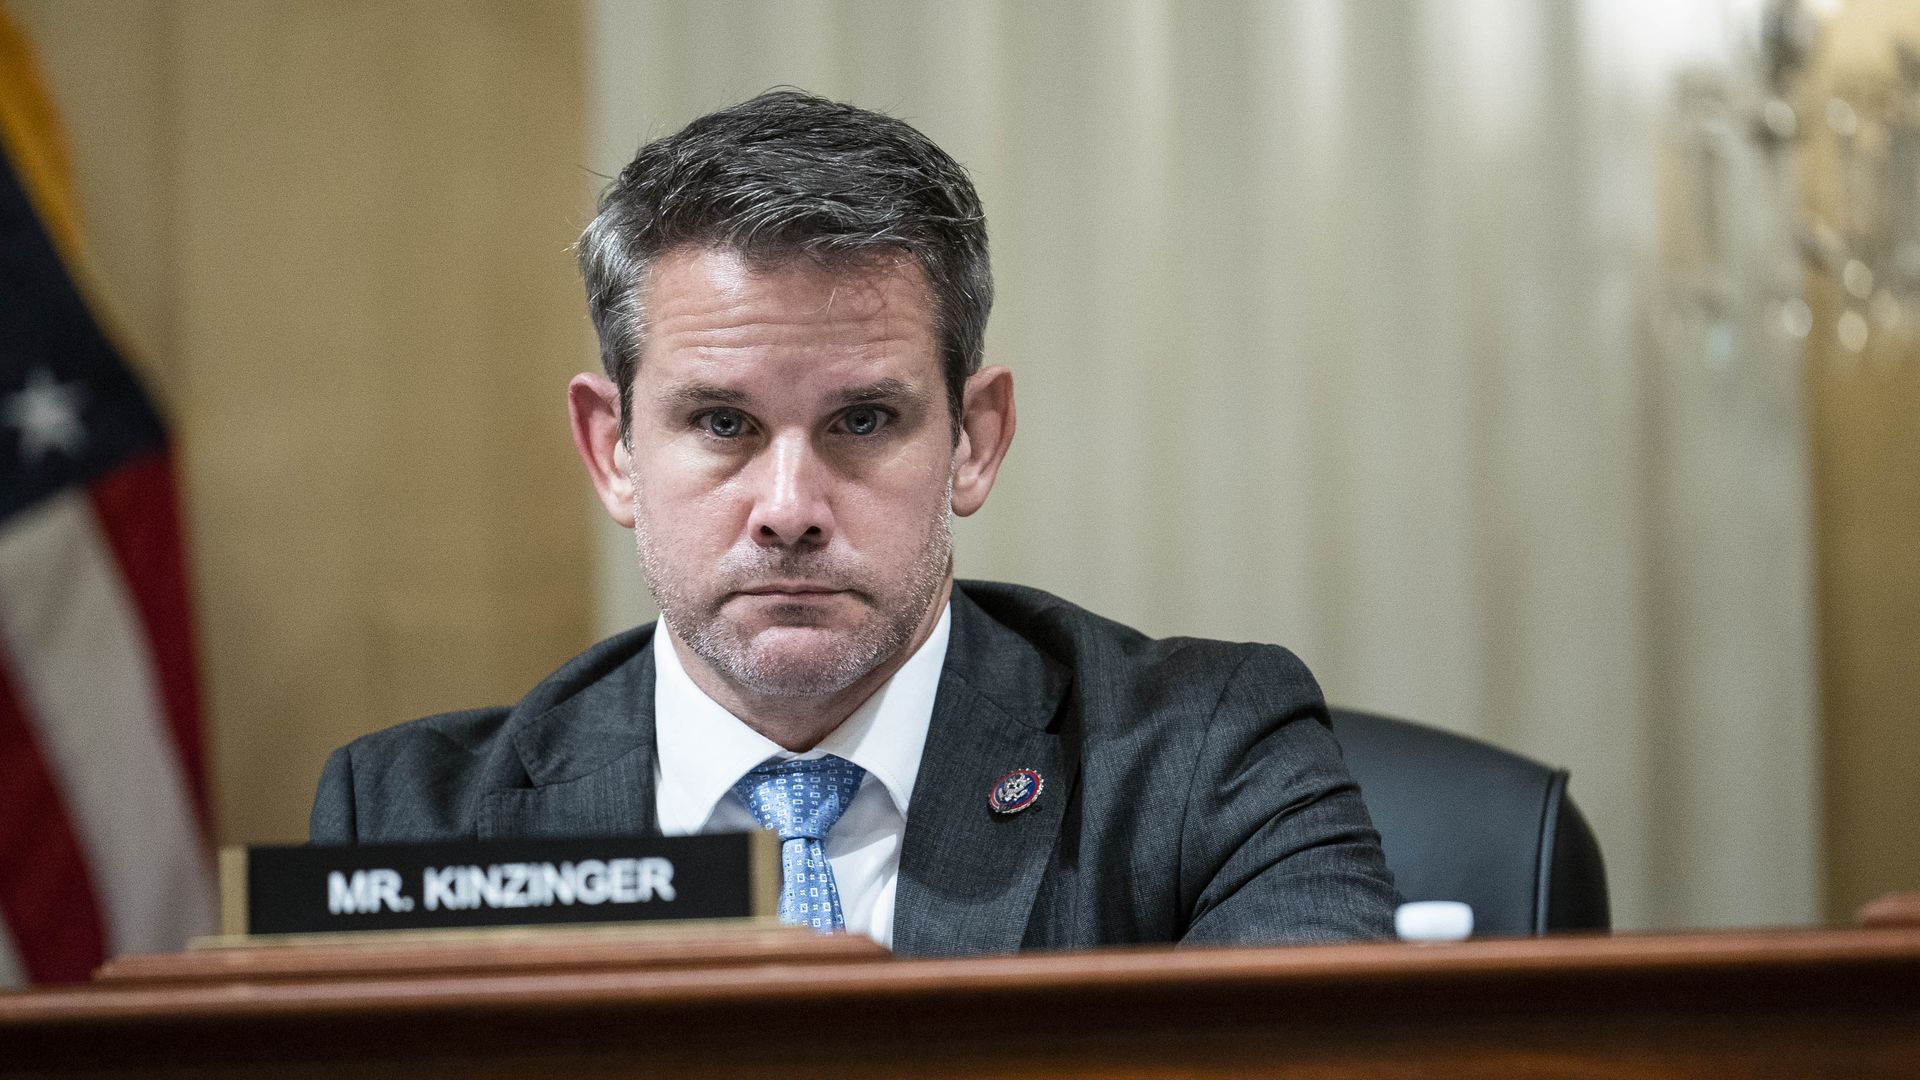 Representative Adam Kinzinger listens during a business meeting of the Select Committee to Investigate the January 6th Attack on the U.S. Capitol in Washington, D.C., U.S., on Tuesday, Oct. 19, 2021.